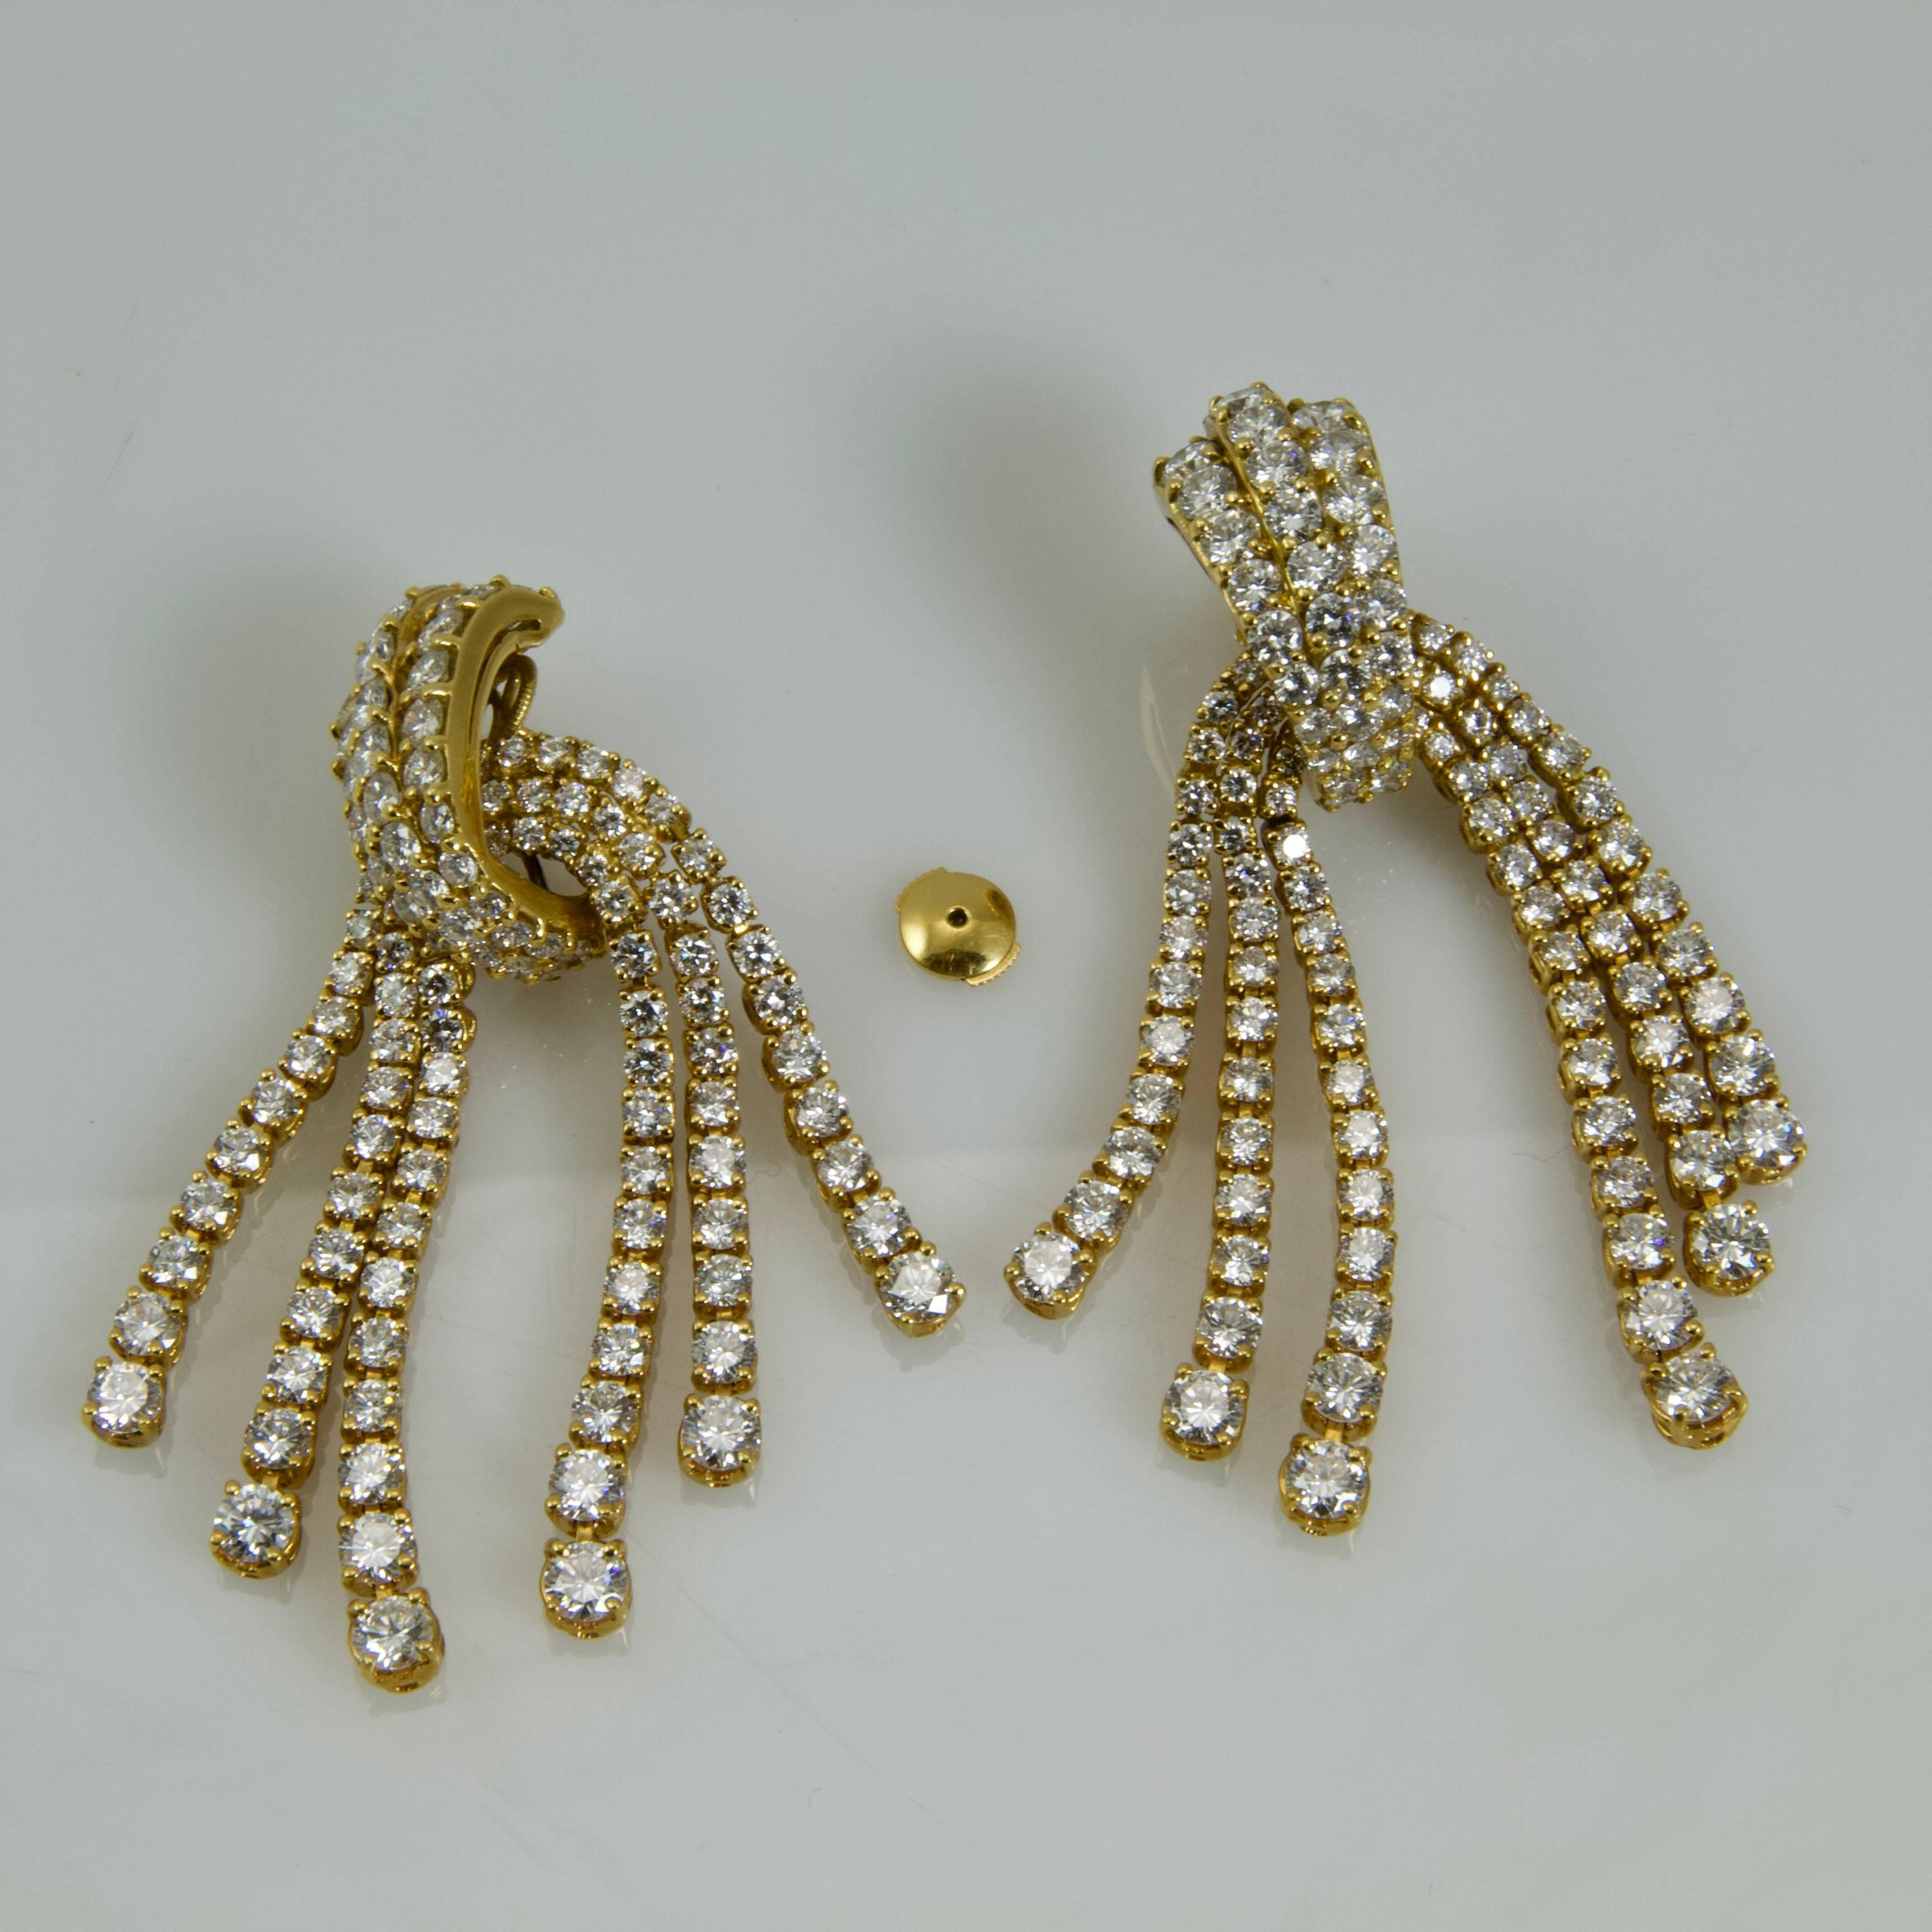 18 kt yellow gold pendant earrings look like a cascade set with 256 round diamonds extra-quality (G-H VS). 
Diamonds weight almost 25-28 carats. 
Typical work of eighties. 
Very sparkling and glittering.
For pierced ear. 
French recense marks.


